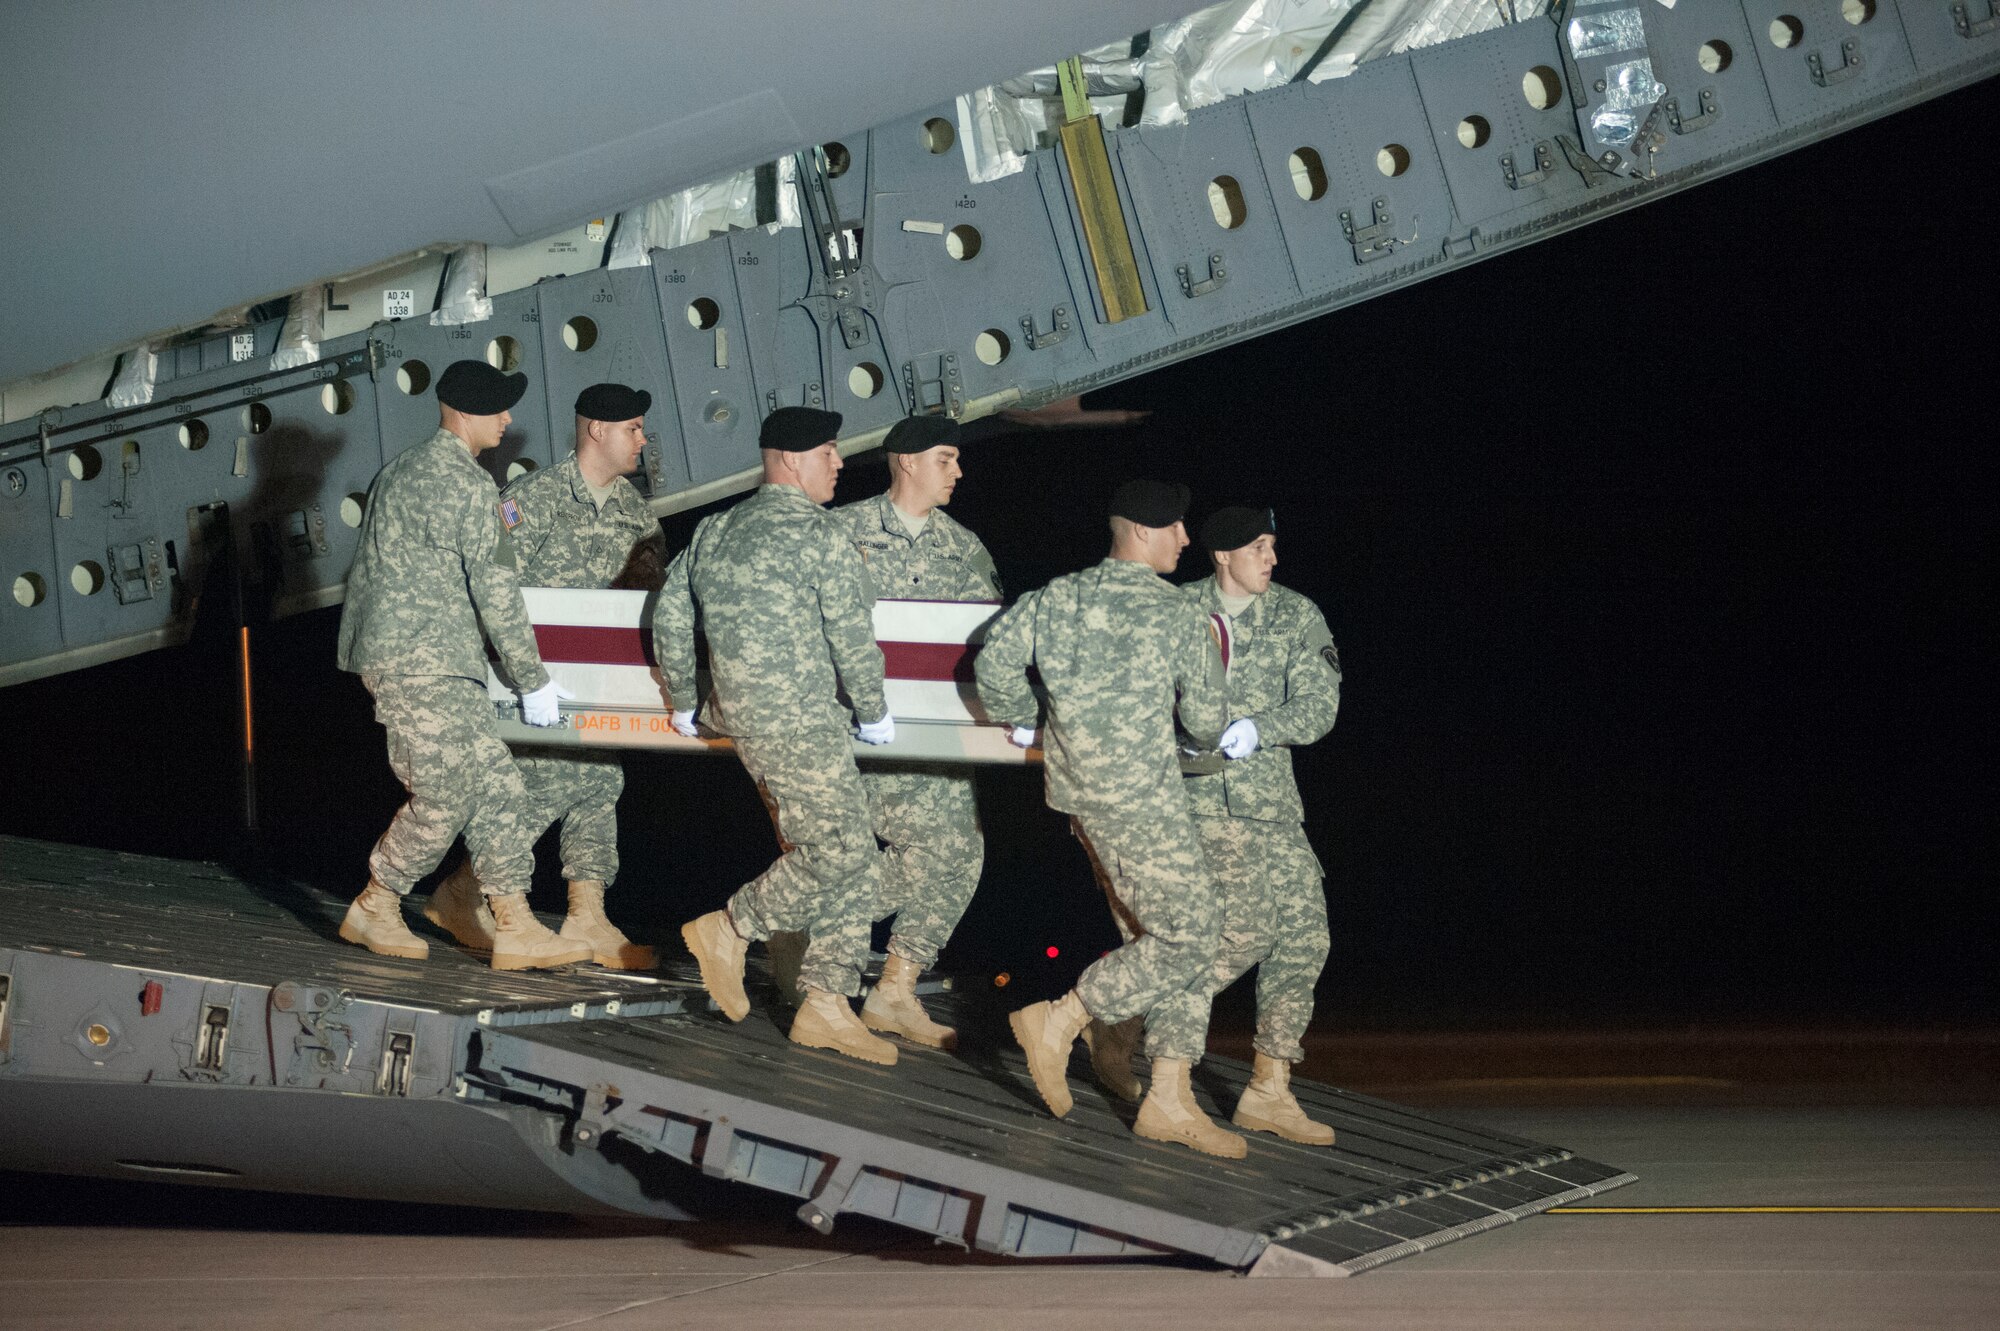 A U.S. Army carry team transfers the remains of Sgt. 1st Class Matthew I. Leggett of Ruskin, Fla., during a dignified transfer Aug. 23, 2014 at Dover Air Force Base, Del. Leggett was assigned to Headquarters and Headquarters Battalion, XVIII Airborne Corps, Fort Bragg, N.C. (U.S. Air Force photo/Senior Airman Jared Duhon)
